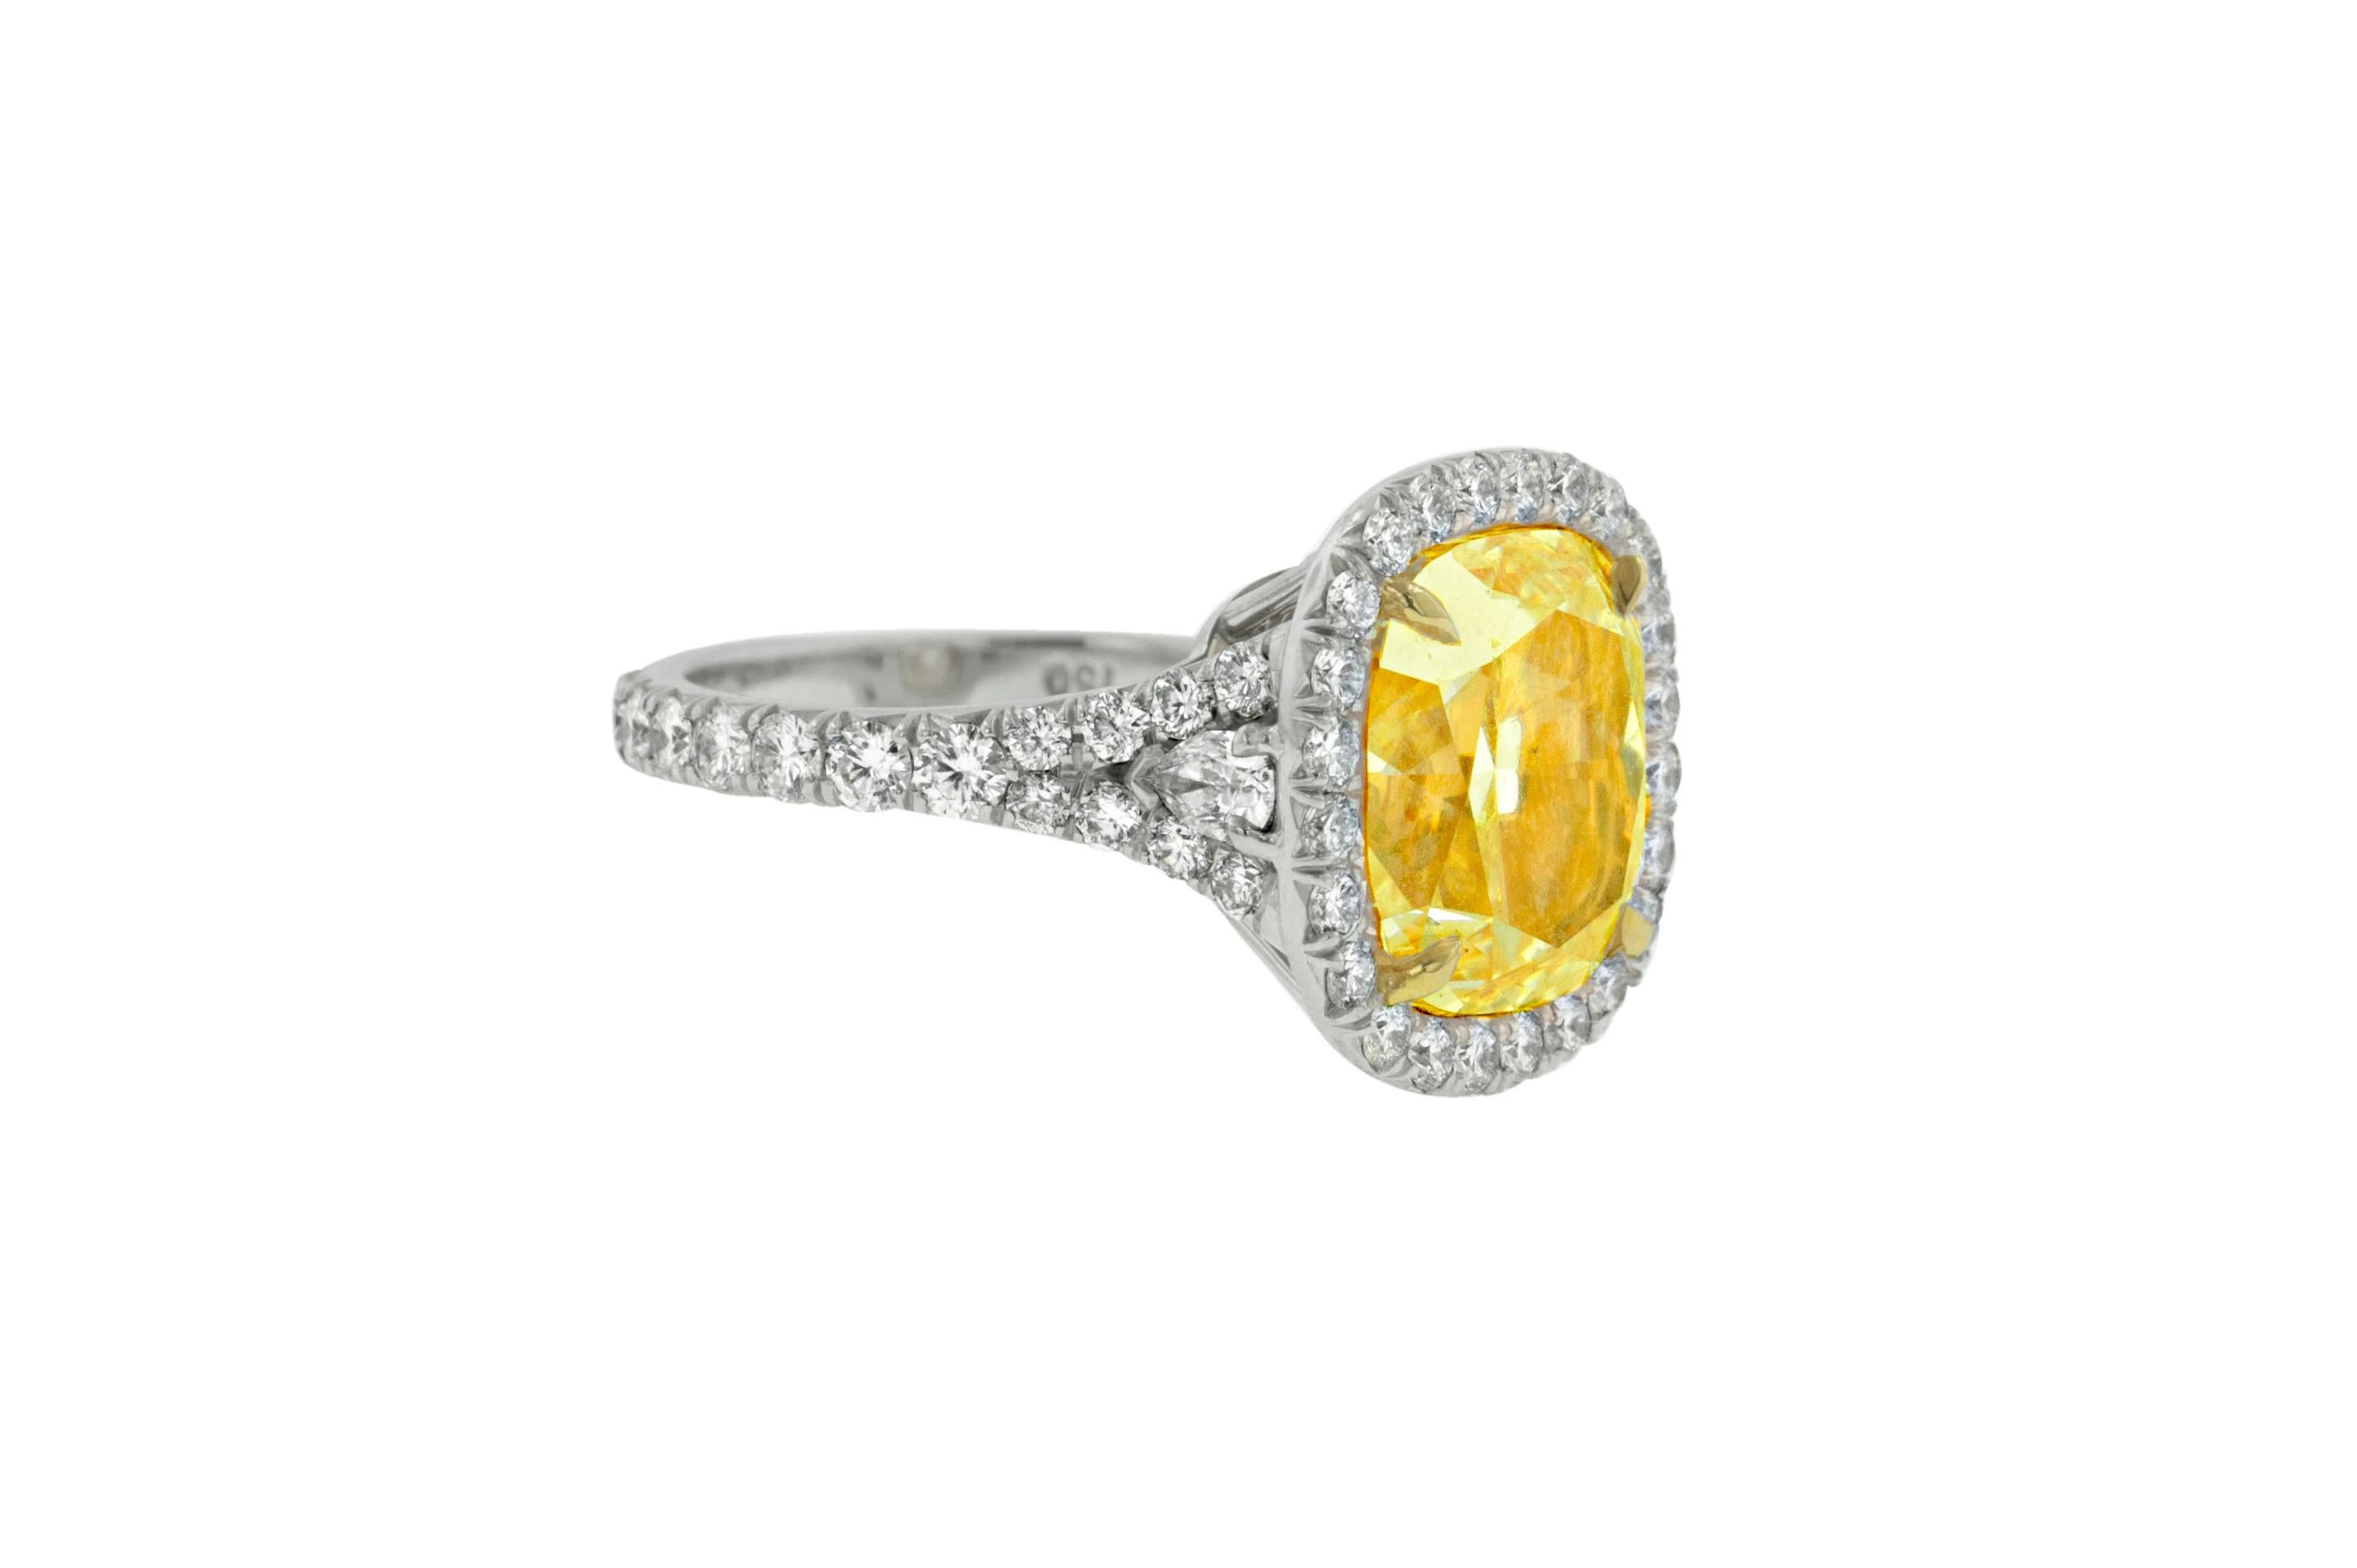 Platinum and 18kt yellow gold fancy yellow diamond ring, features EGL certified (radc946)7.65 fy-vs2 set in halo setting with two pear shape diamonds micropave round diamonds total 1.60ct
